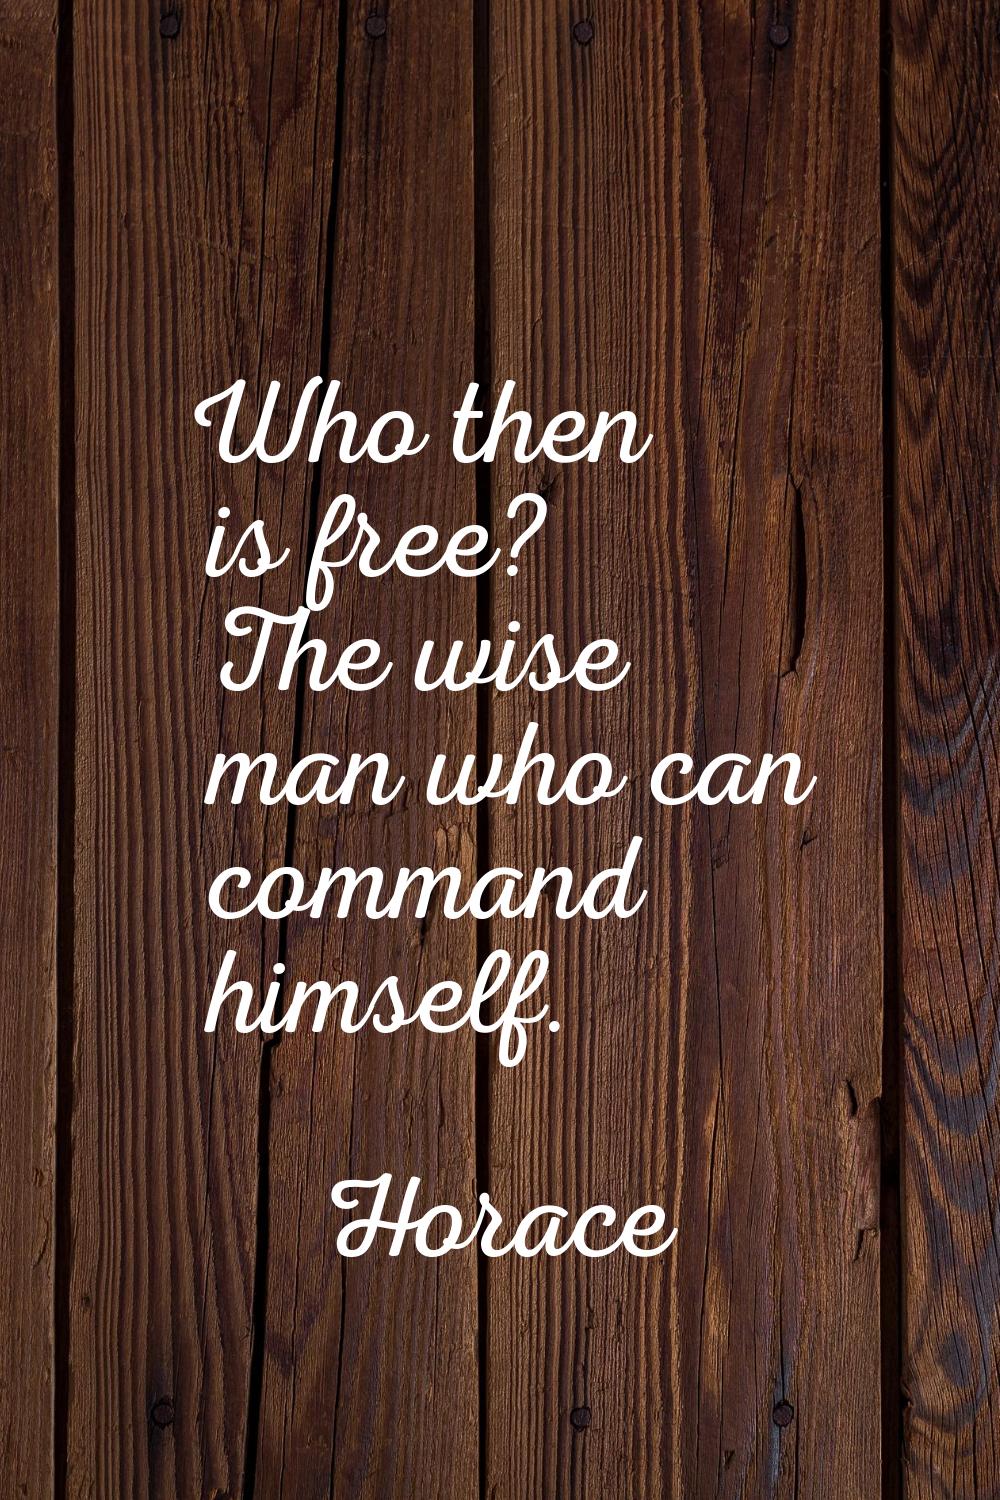 Who then is free? The wise man who can command himself.